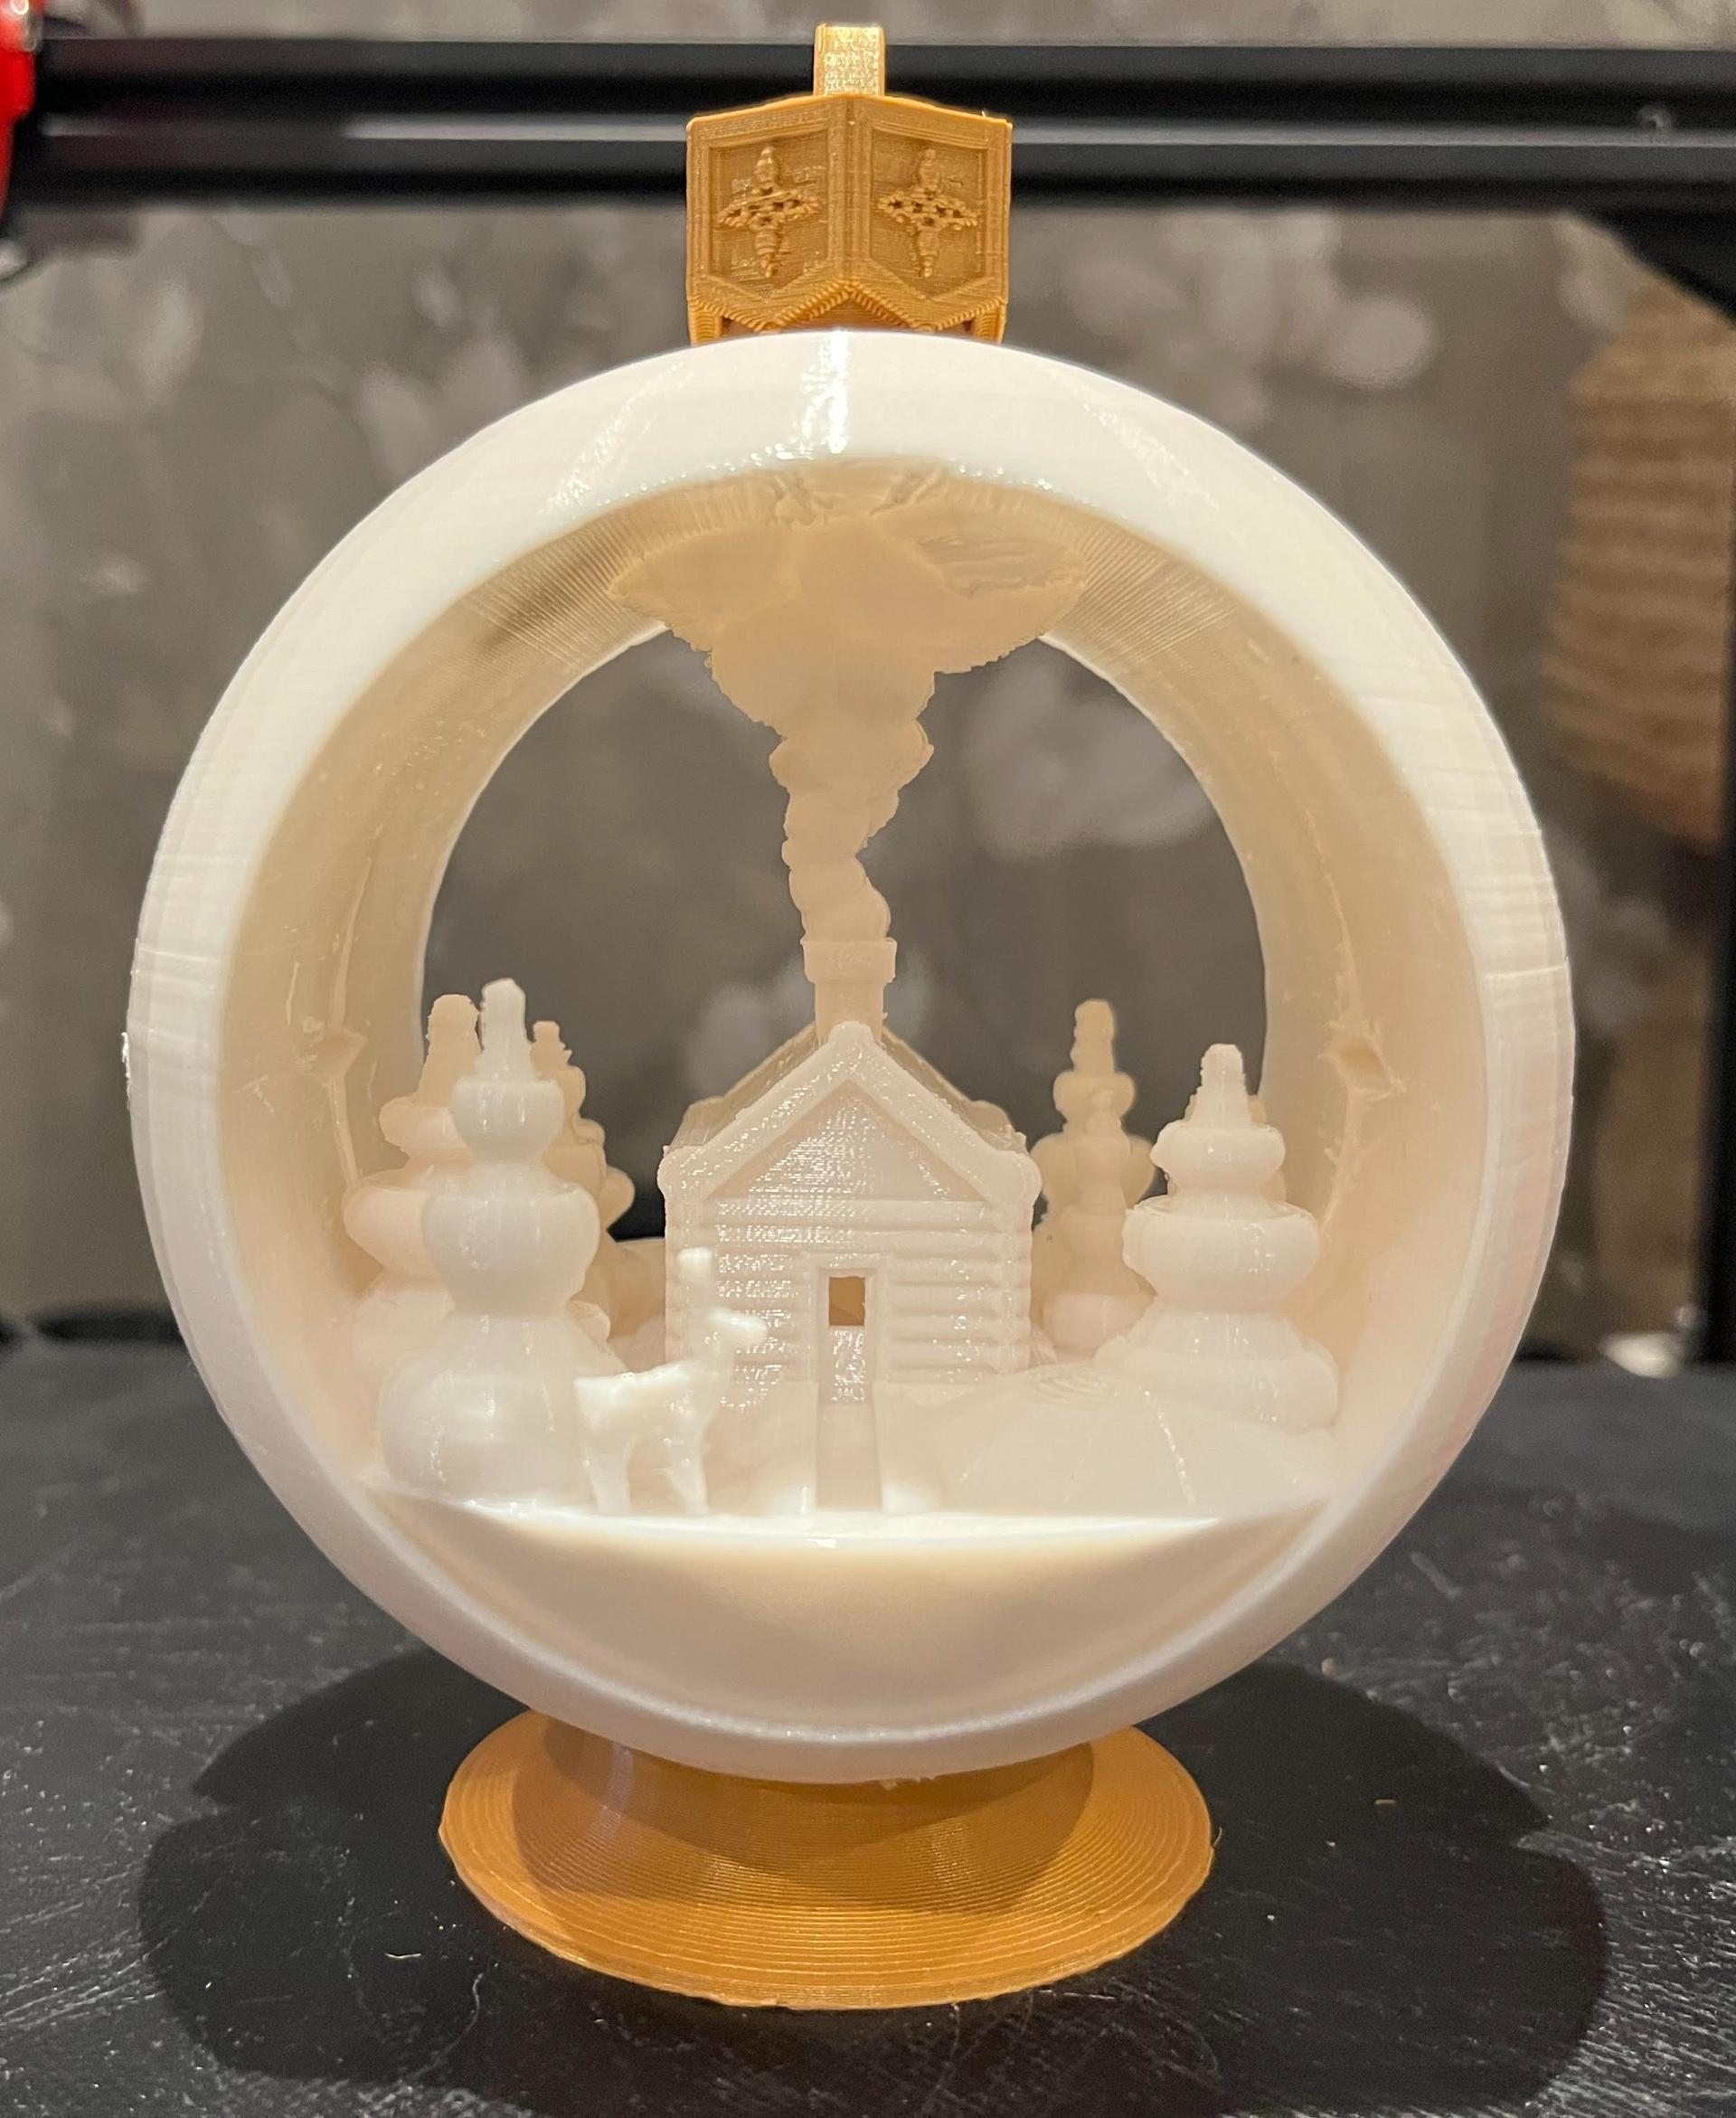 Snow Globe Votive Ornament - Winter Cabin - Printed beautifully!!! A tip to all of you who have had trouble with the smoke breaking off. I printed the model without Z-hop all the way up to the smoke stack then added Z-hop 0,5mm the rest of the way up. That way the nozzle won't hit the print when moving. I'm using Cura 5.5 and there is a way to add Z-hop later in the model under Extensions/Post Processing/Modify G-Code/Alter Z-hops layer-to-layer. You have to add it manually just following this link.

https://github.com/Ultimaker/Cura/issues/15280 - 3d model